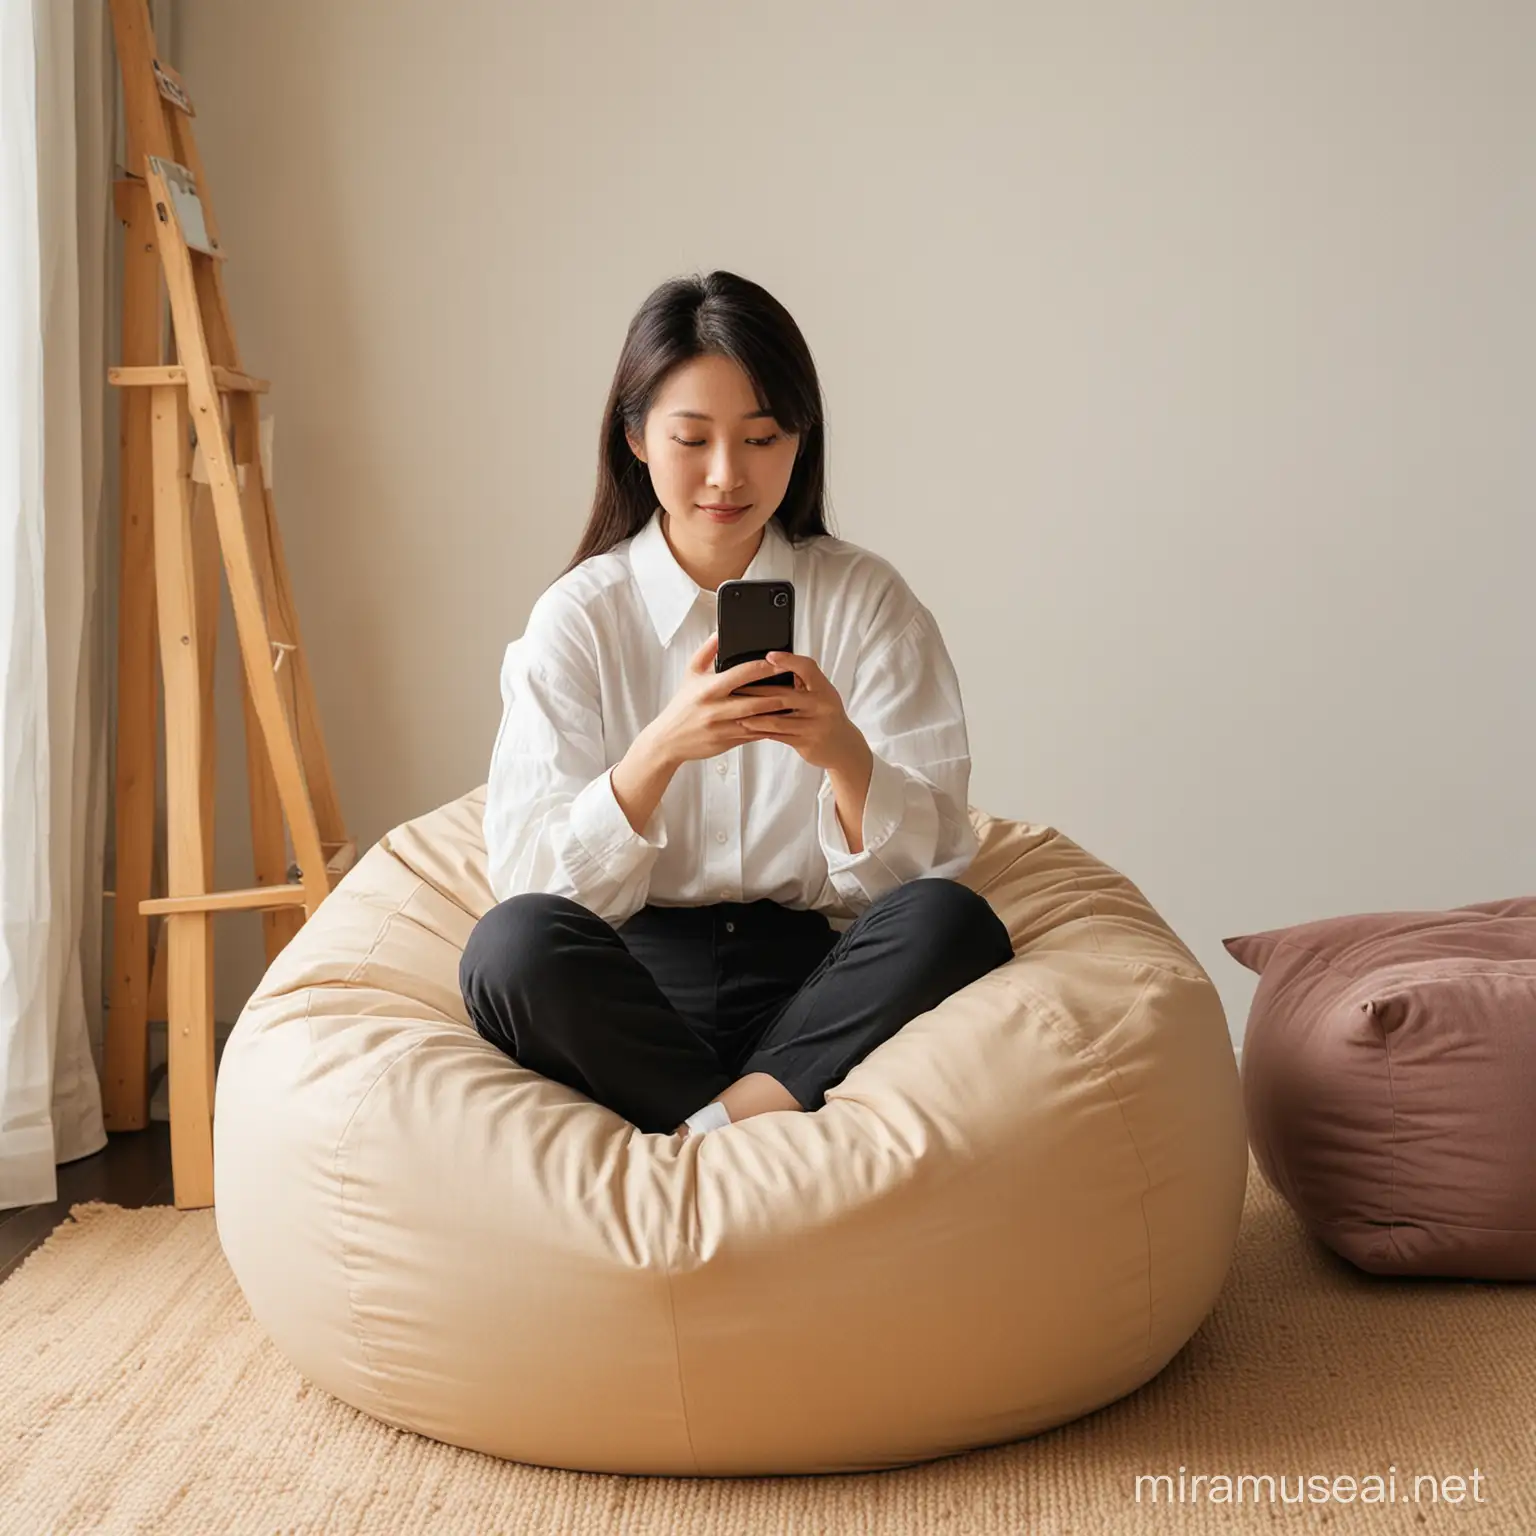 Japanese Woman Relaxing on Bean Bag with Smartphone